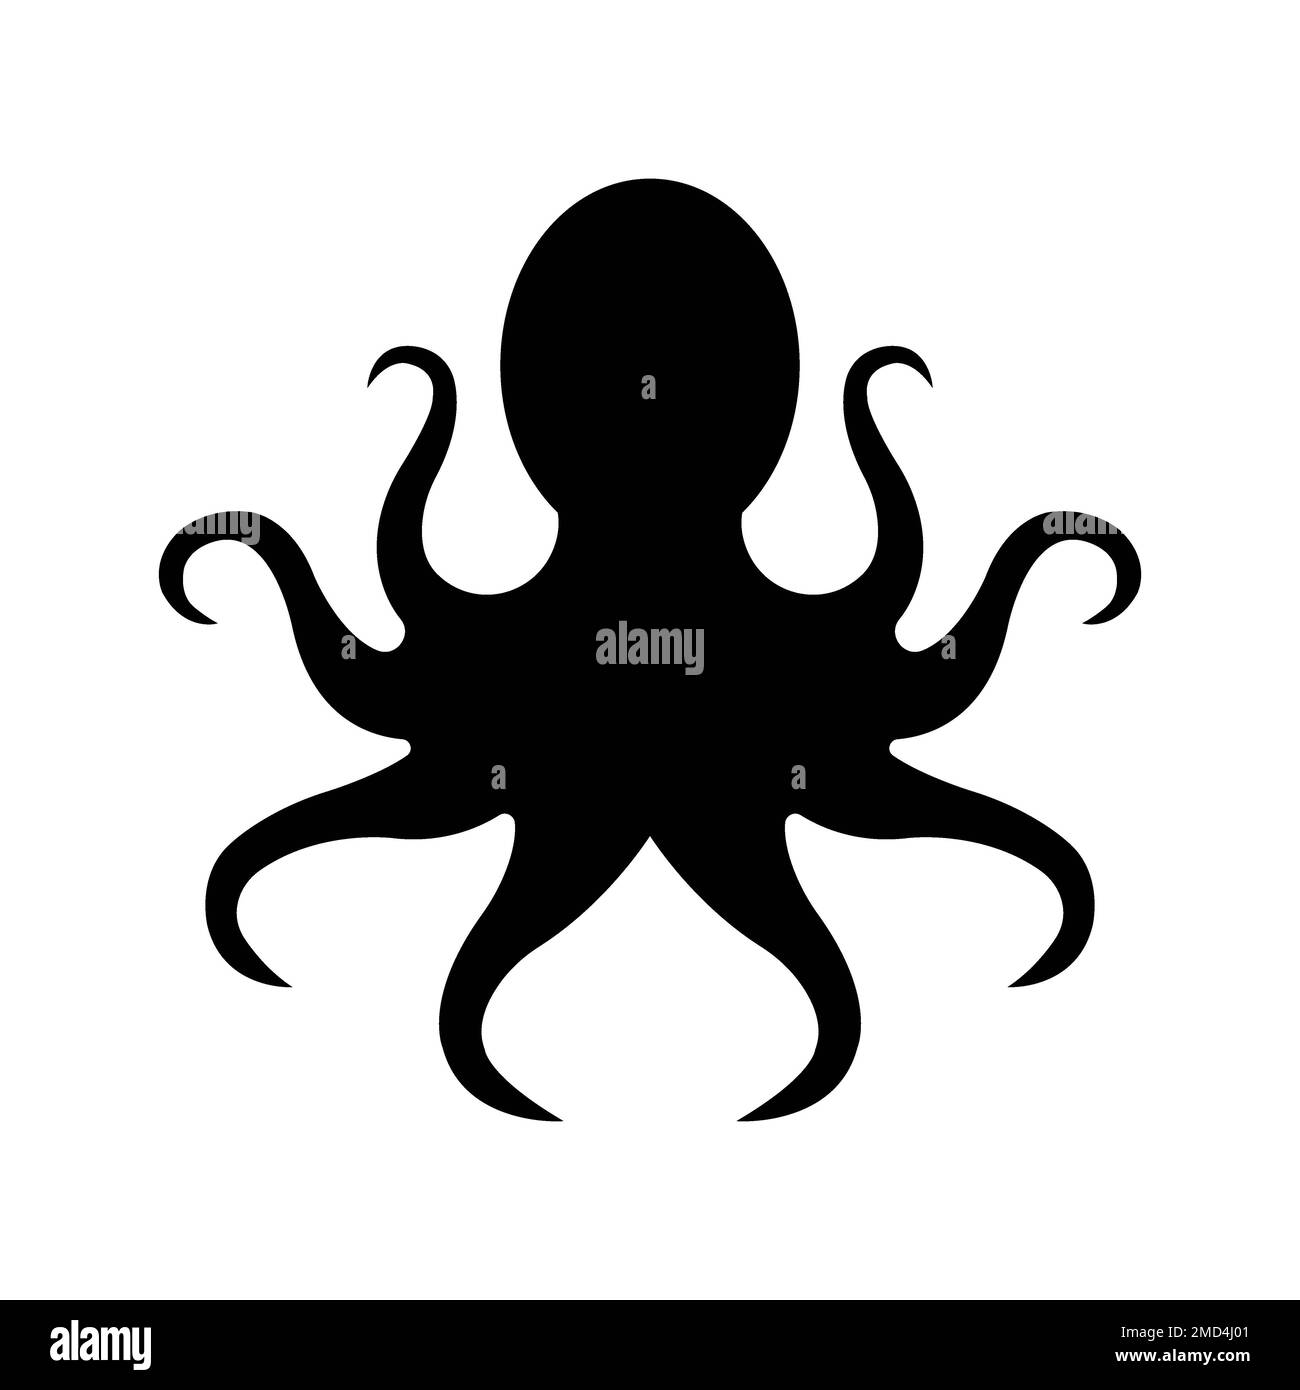 Cephalopod Black and White Stock Photos & Images - Alamy